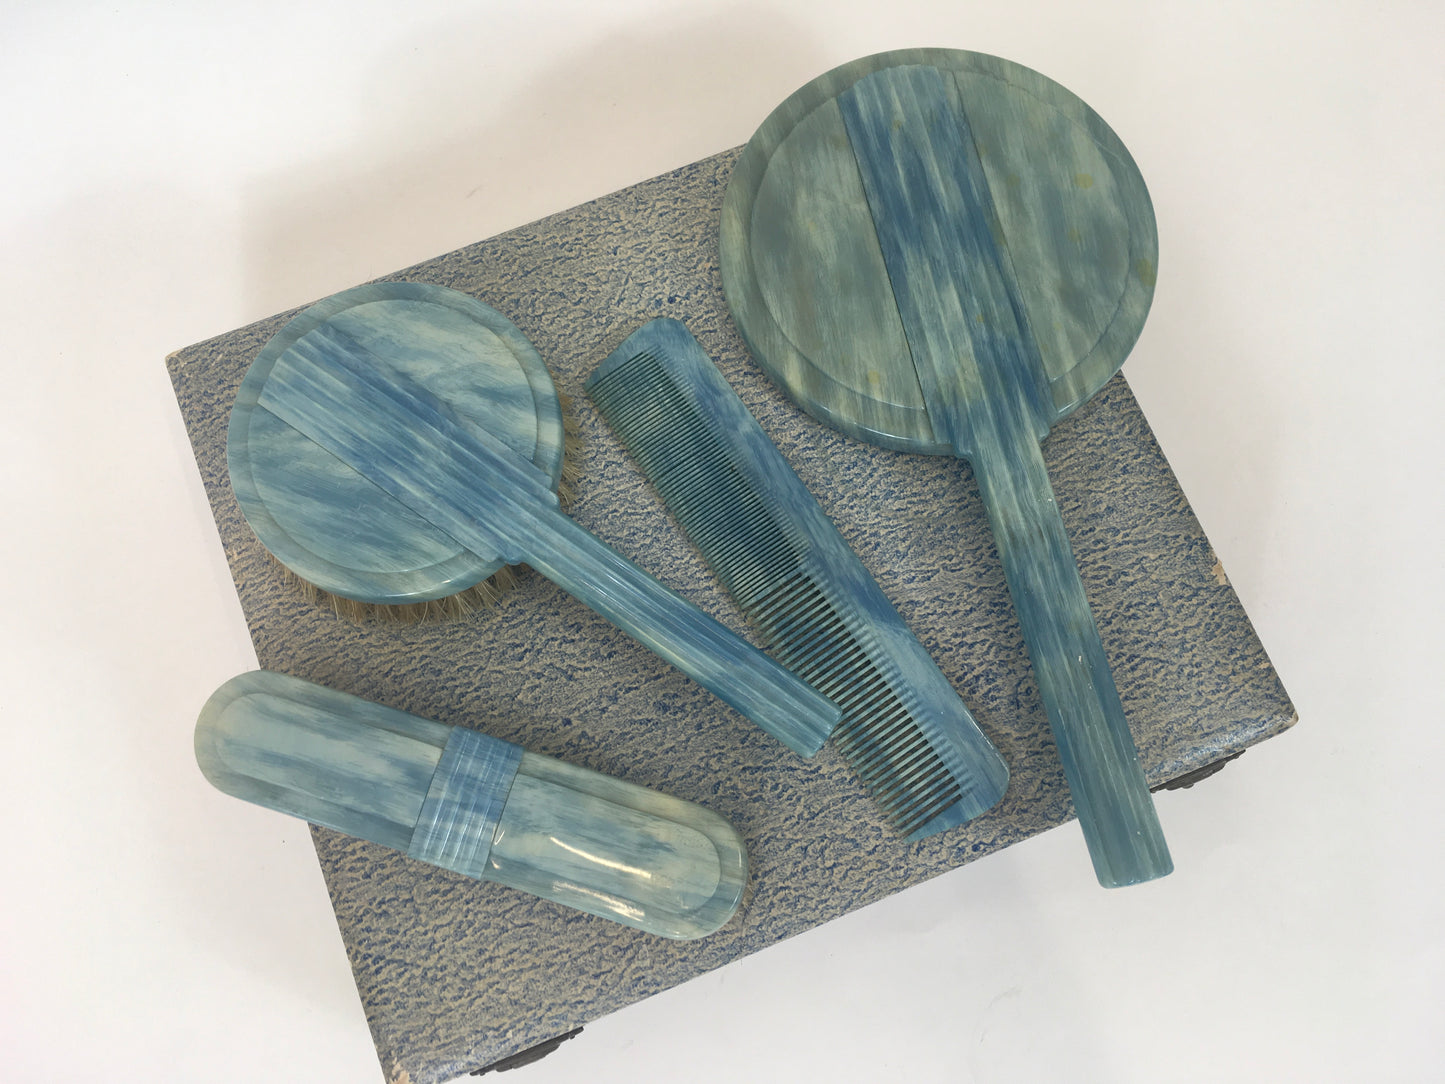 Original early 50’s Phenolic Dressing Table Set - In Mottled Deco Blue In Original Box